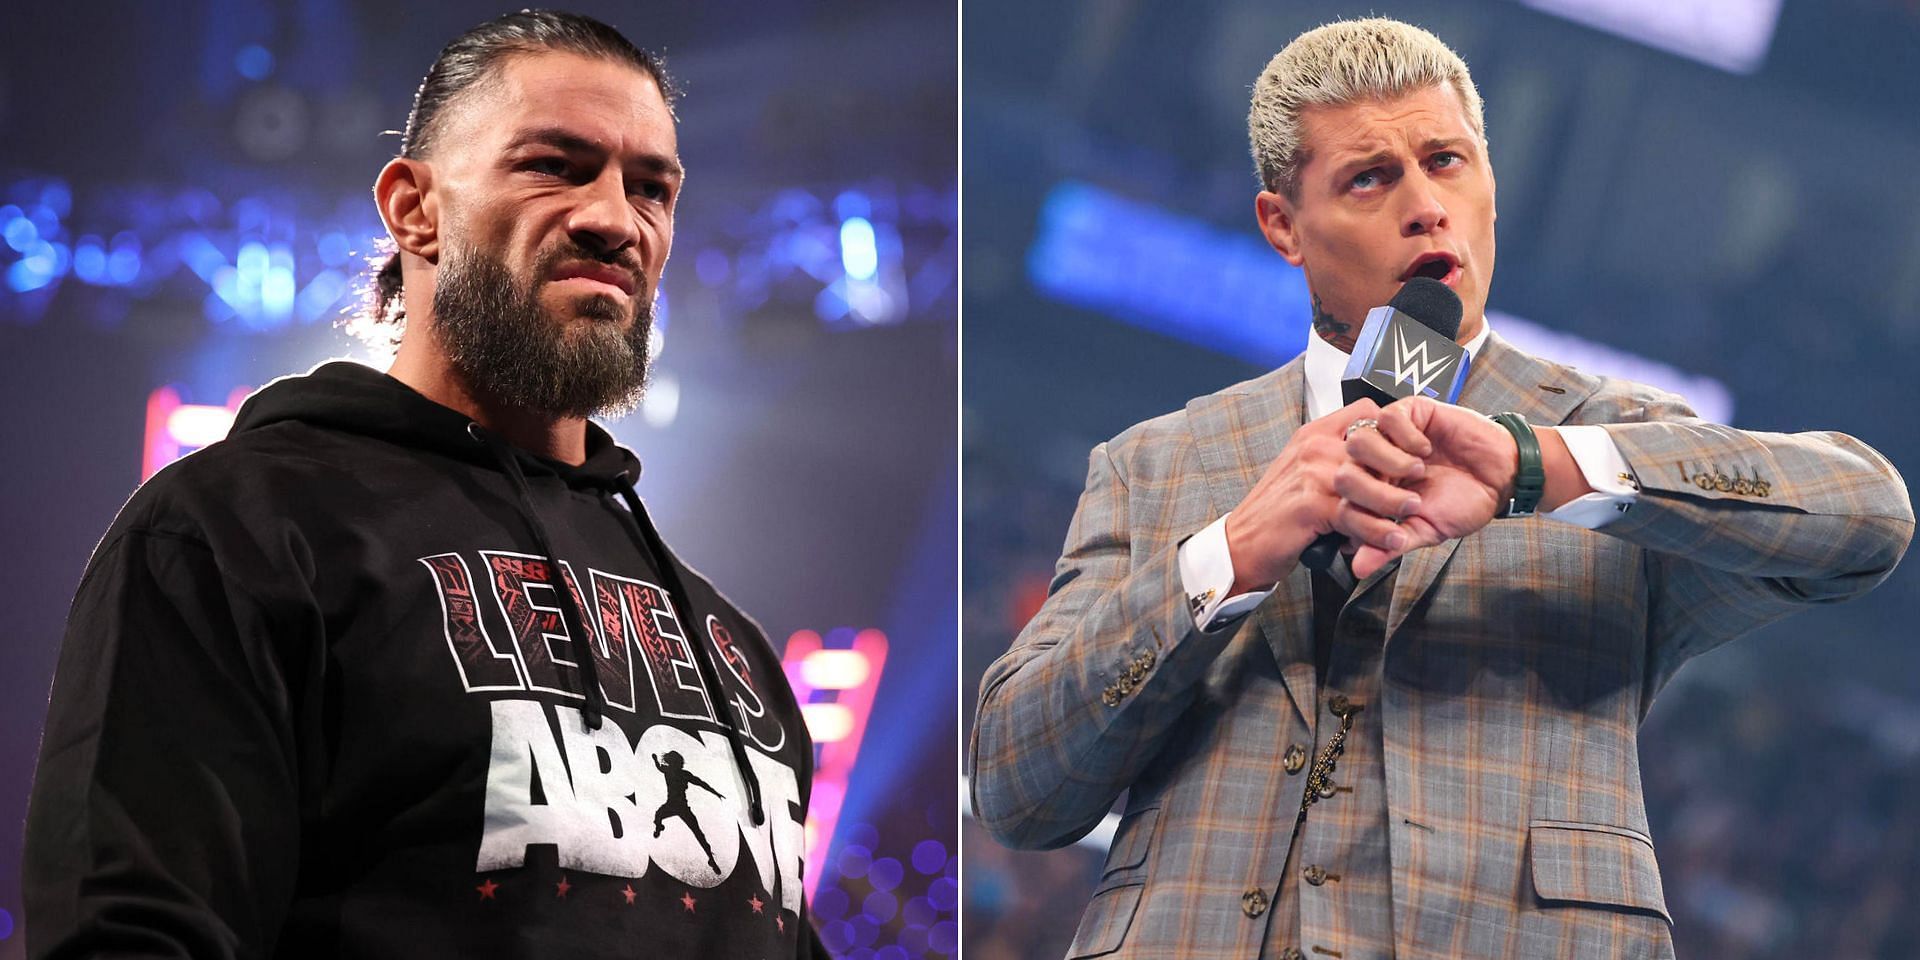 Cody Rhodes and Roman Reigns were involved in a confrontation on SmackDown